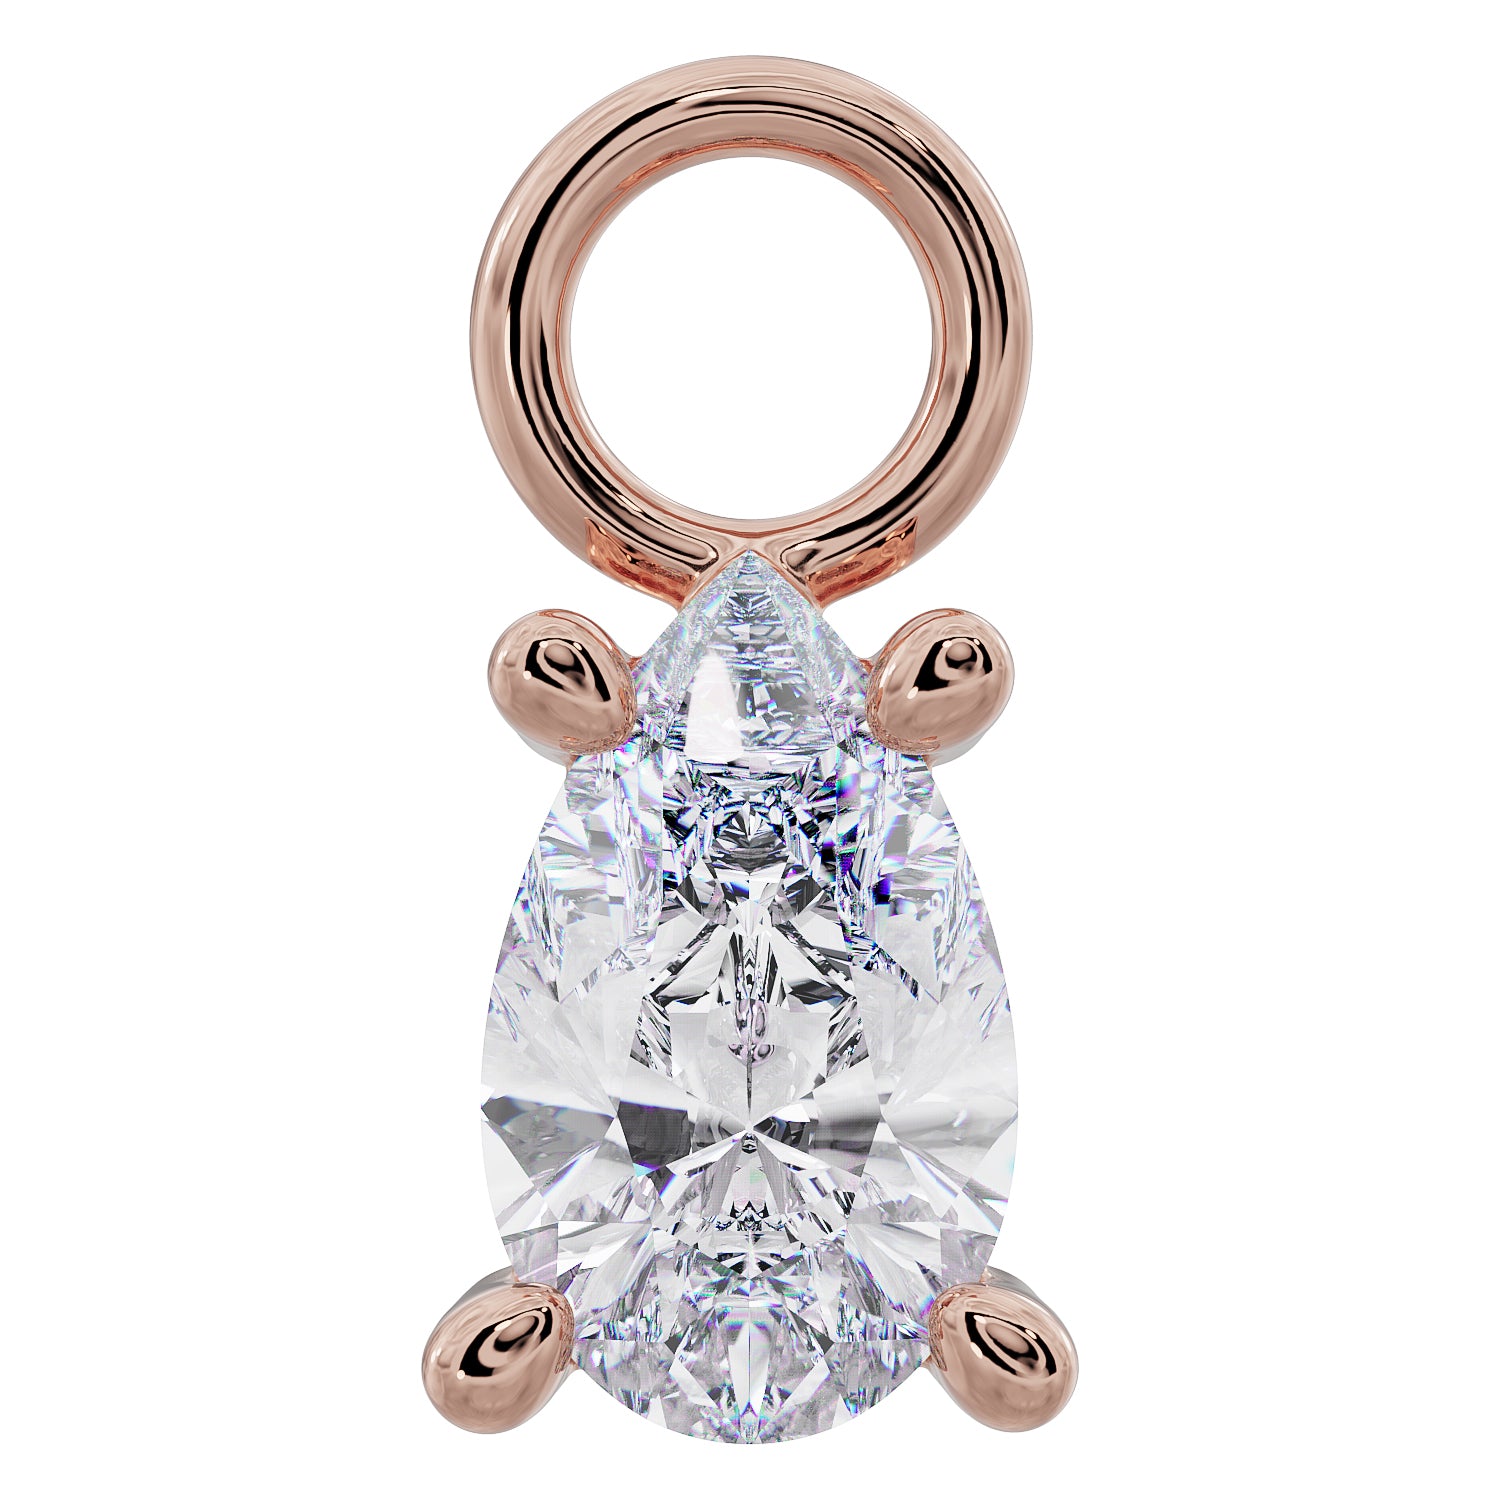 Pear Drop Diamond or CZ Charm Accessory for Piercing Jewelry-Cubic Zirconia   14K Rose Gold